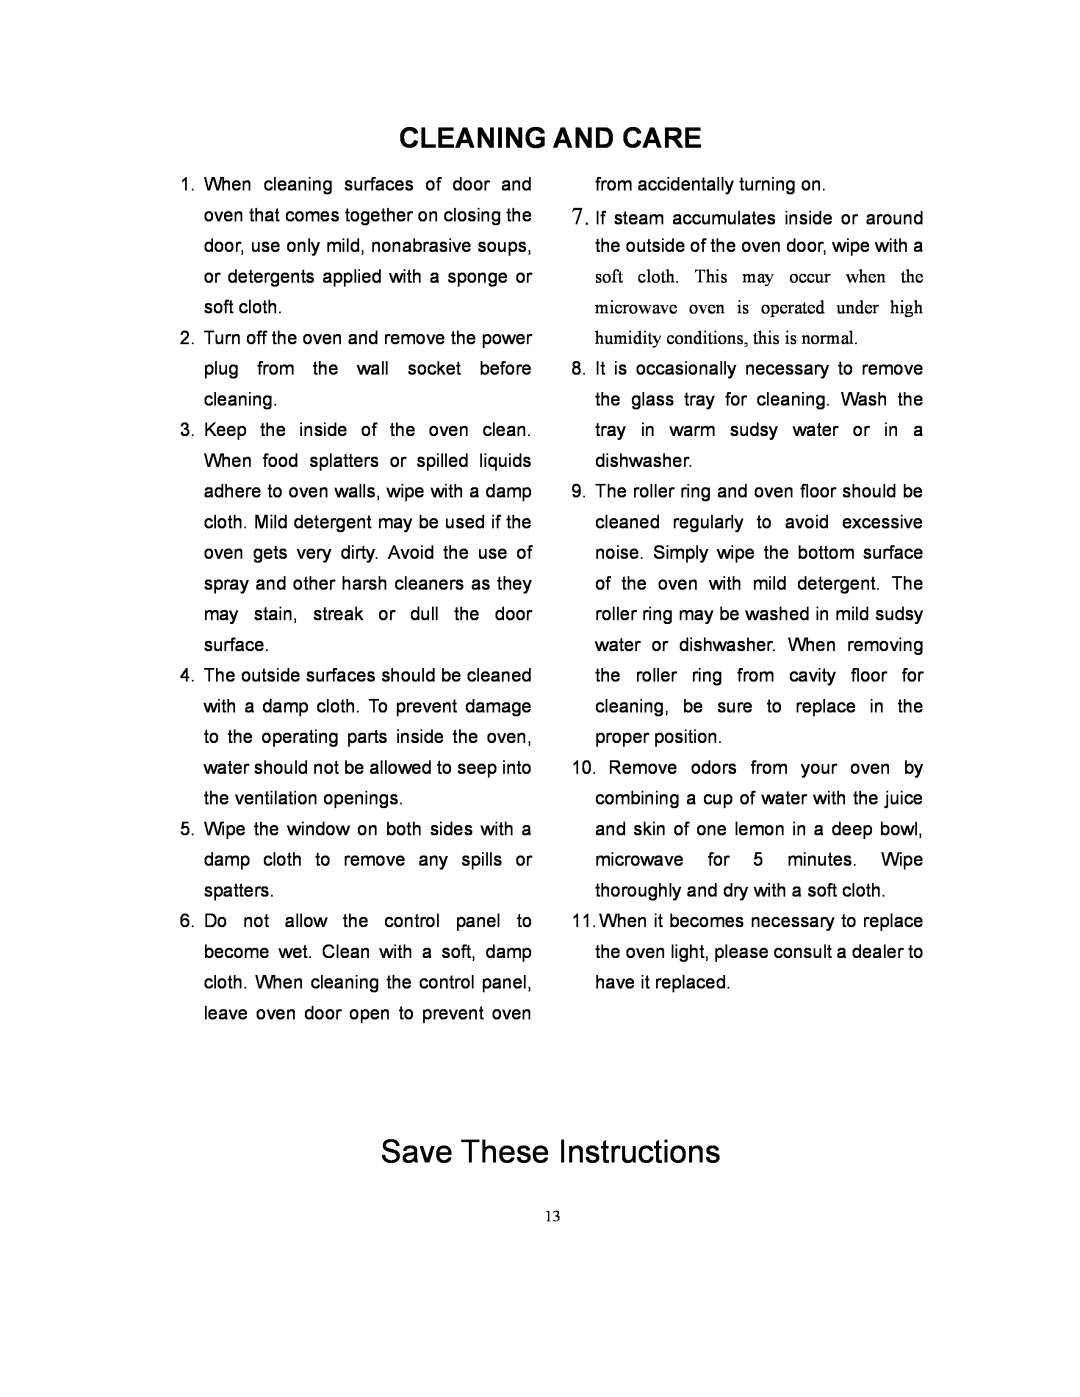 Kenmore 87039 owner manual Save These Instructions, Cleaning And Care 